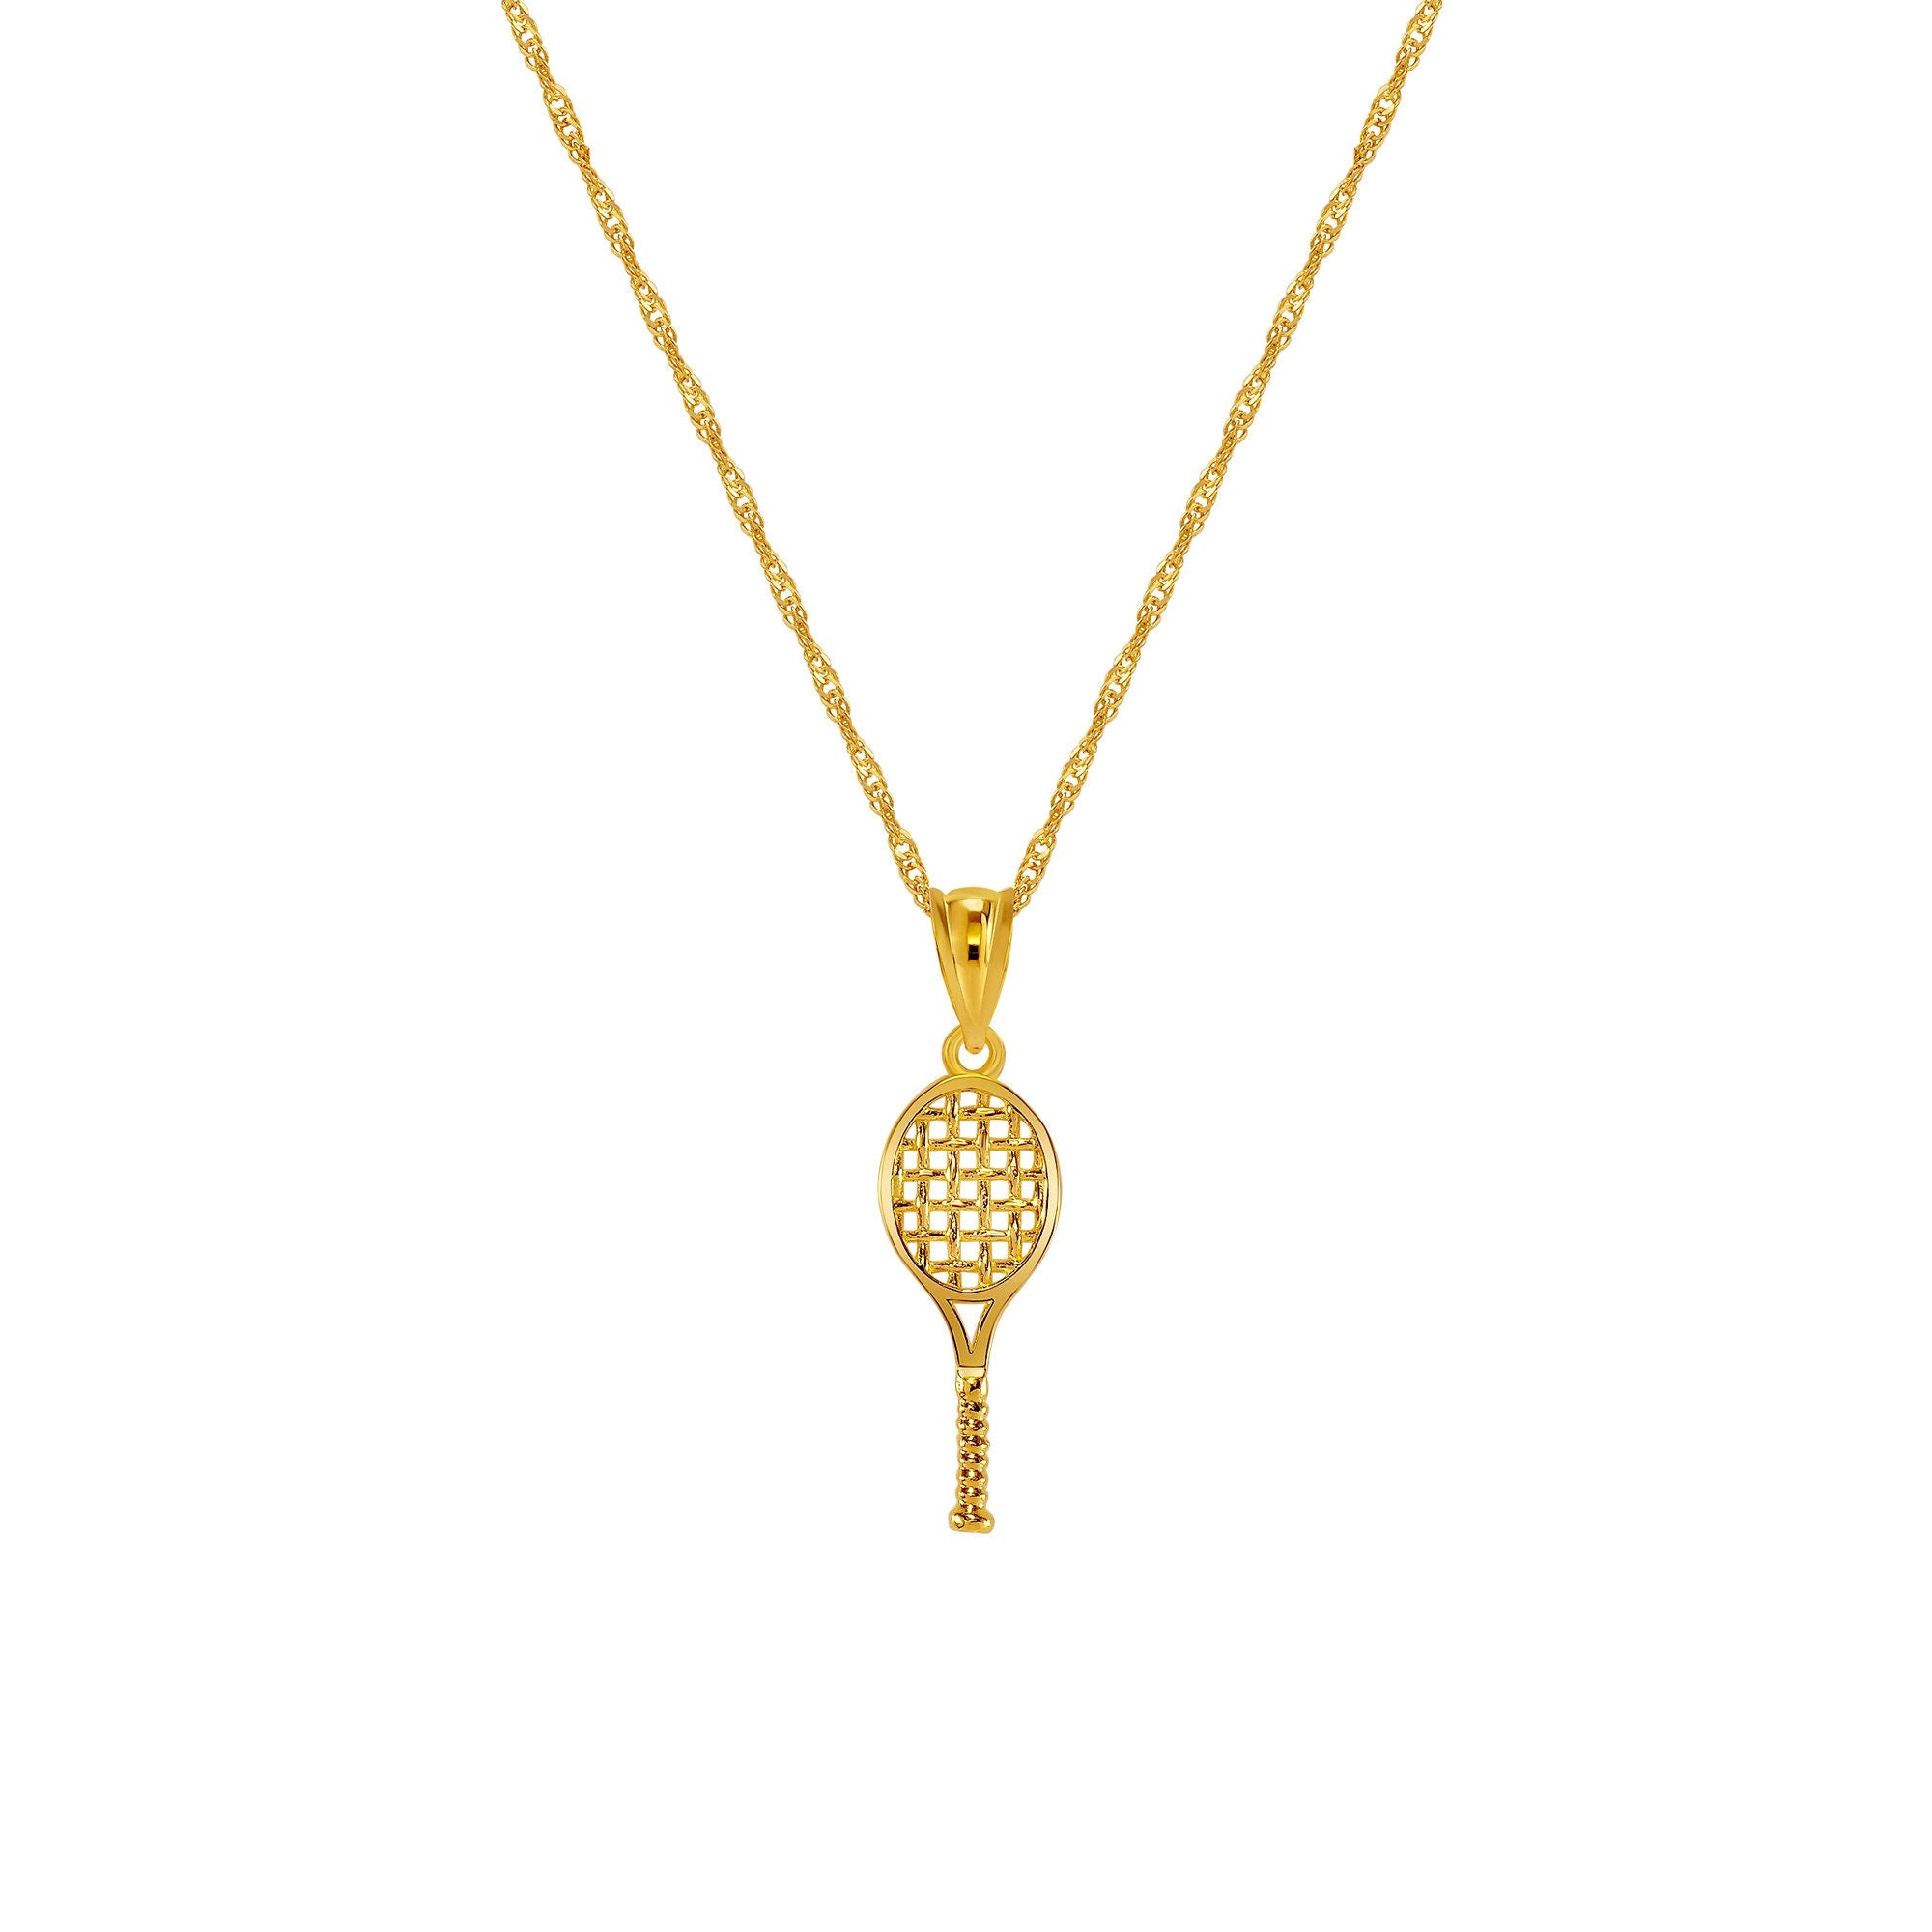 14k solid gold tennis racket pendant on 18" solid gold chain